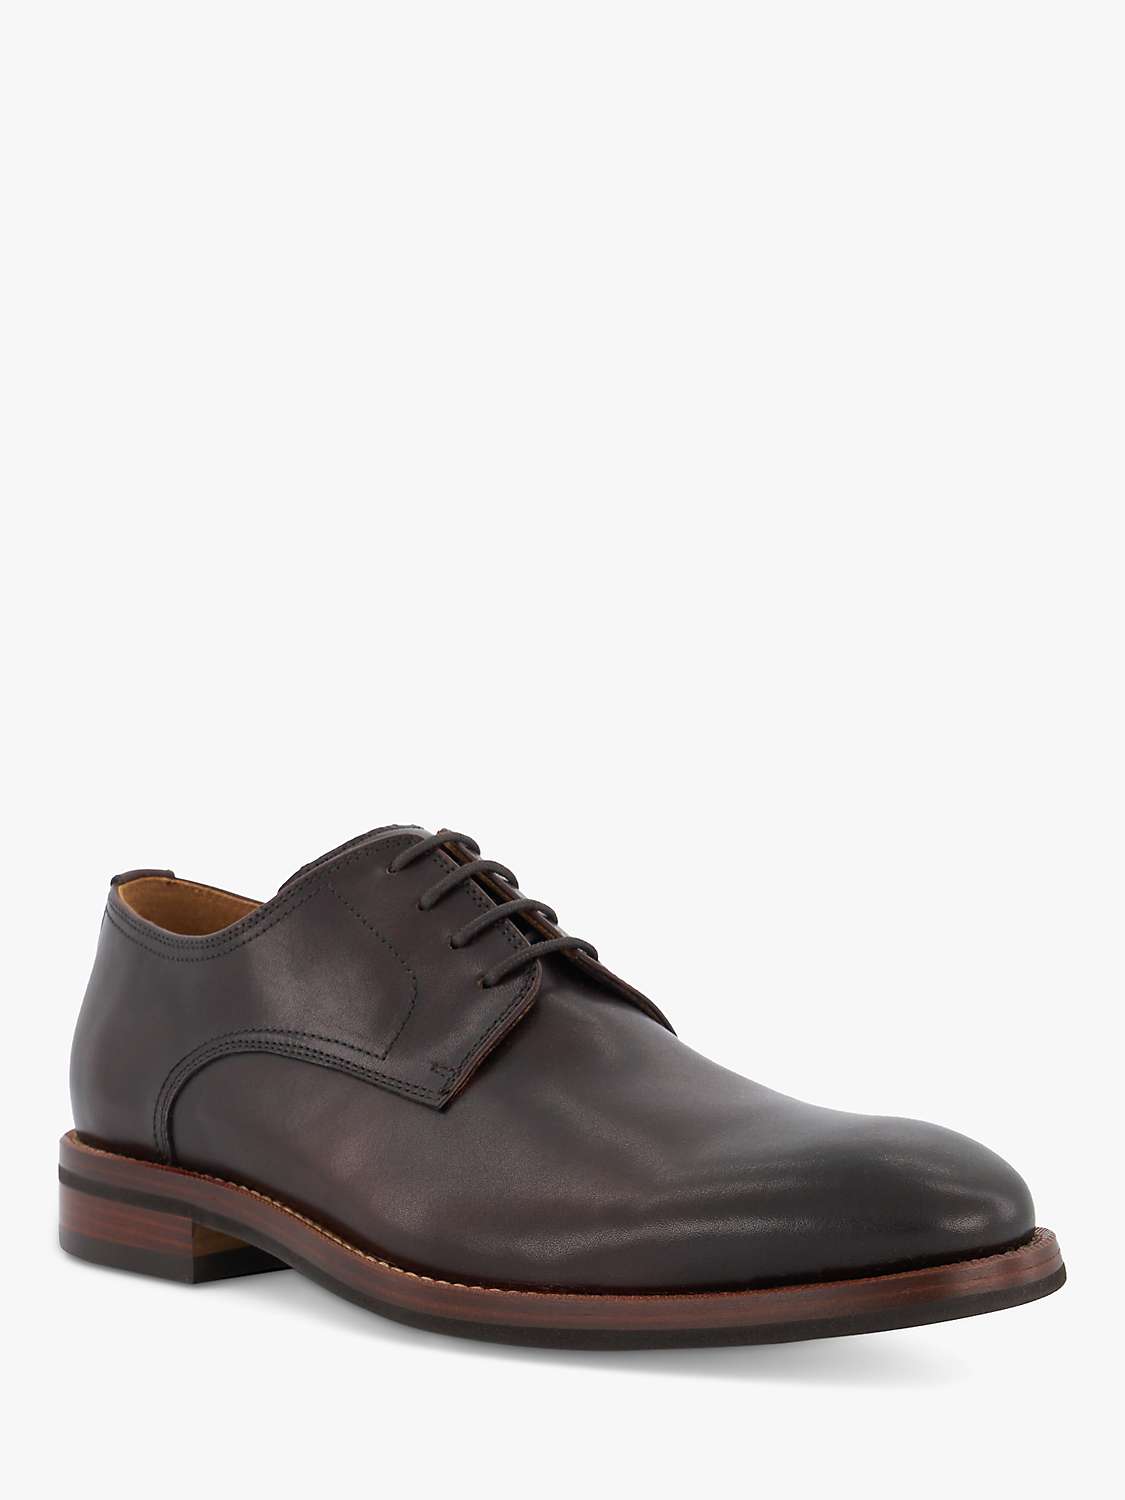 Buy Dune Sinclairs Lace Up Gibson Shoes Online at johnlewis.com